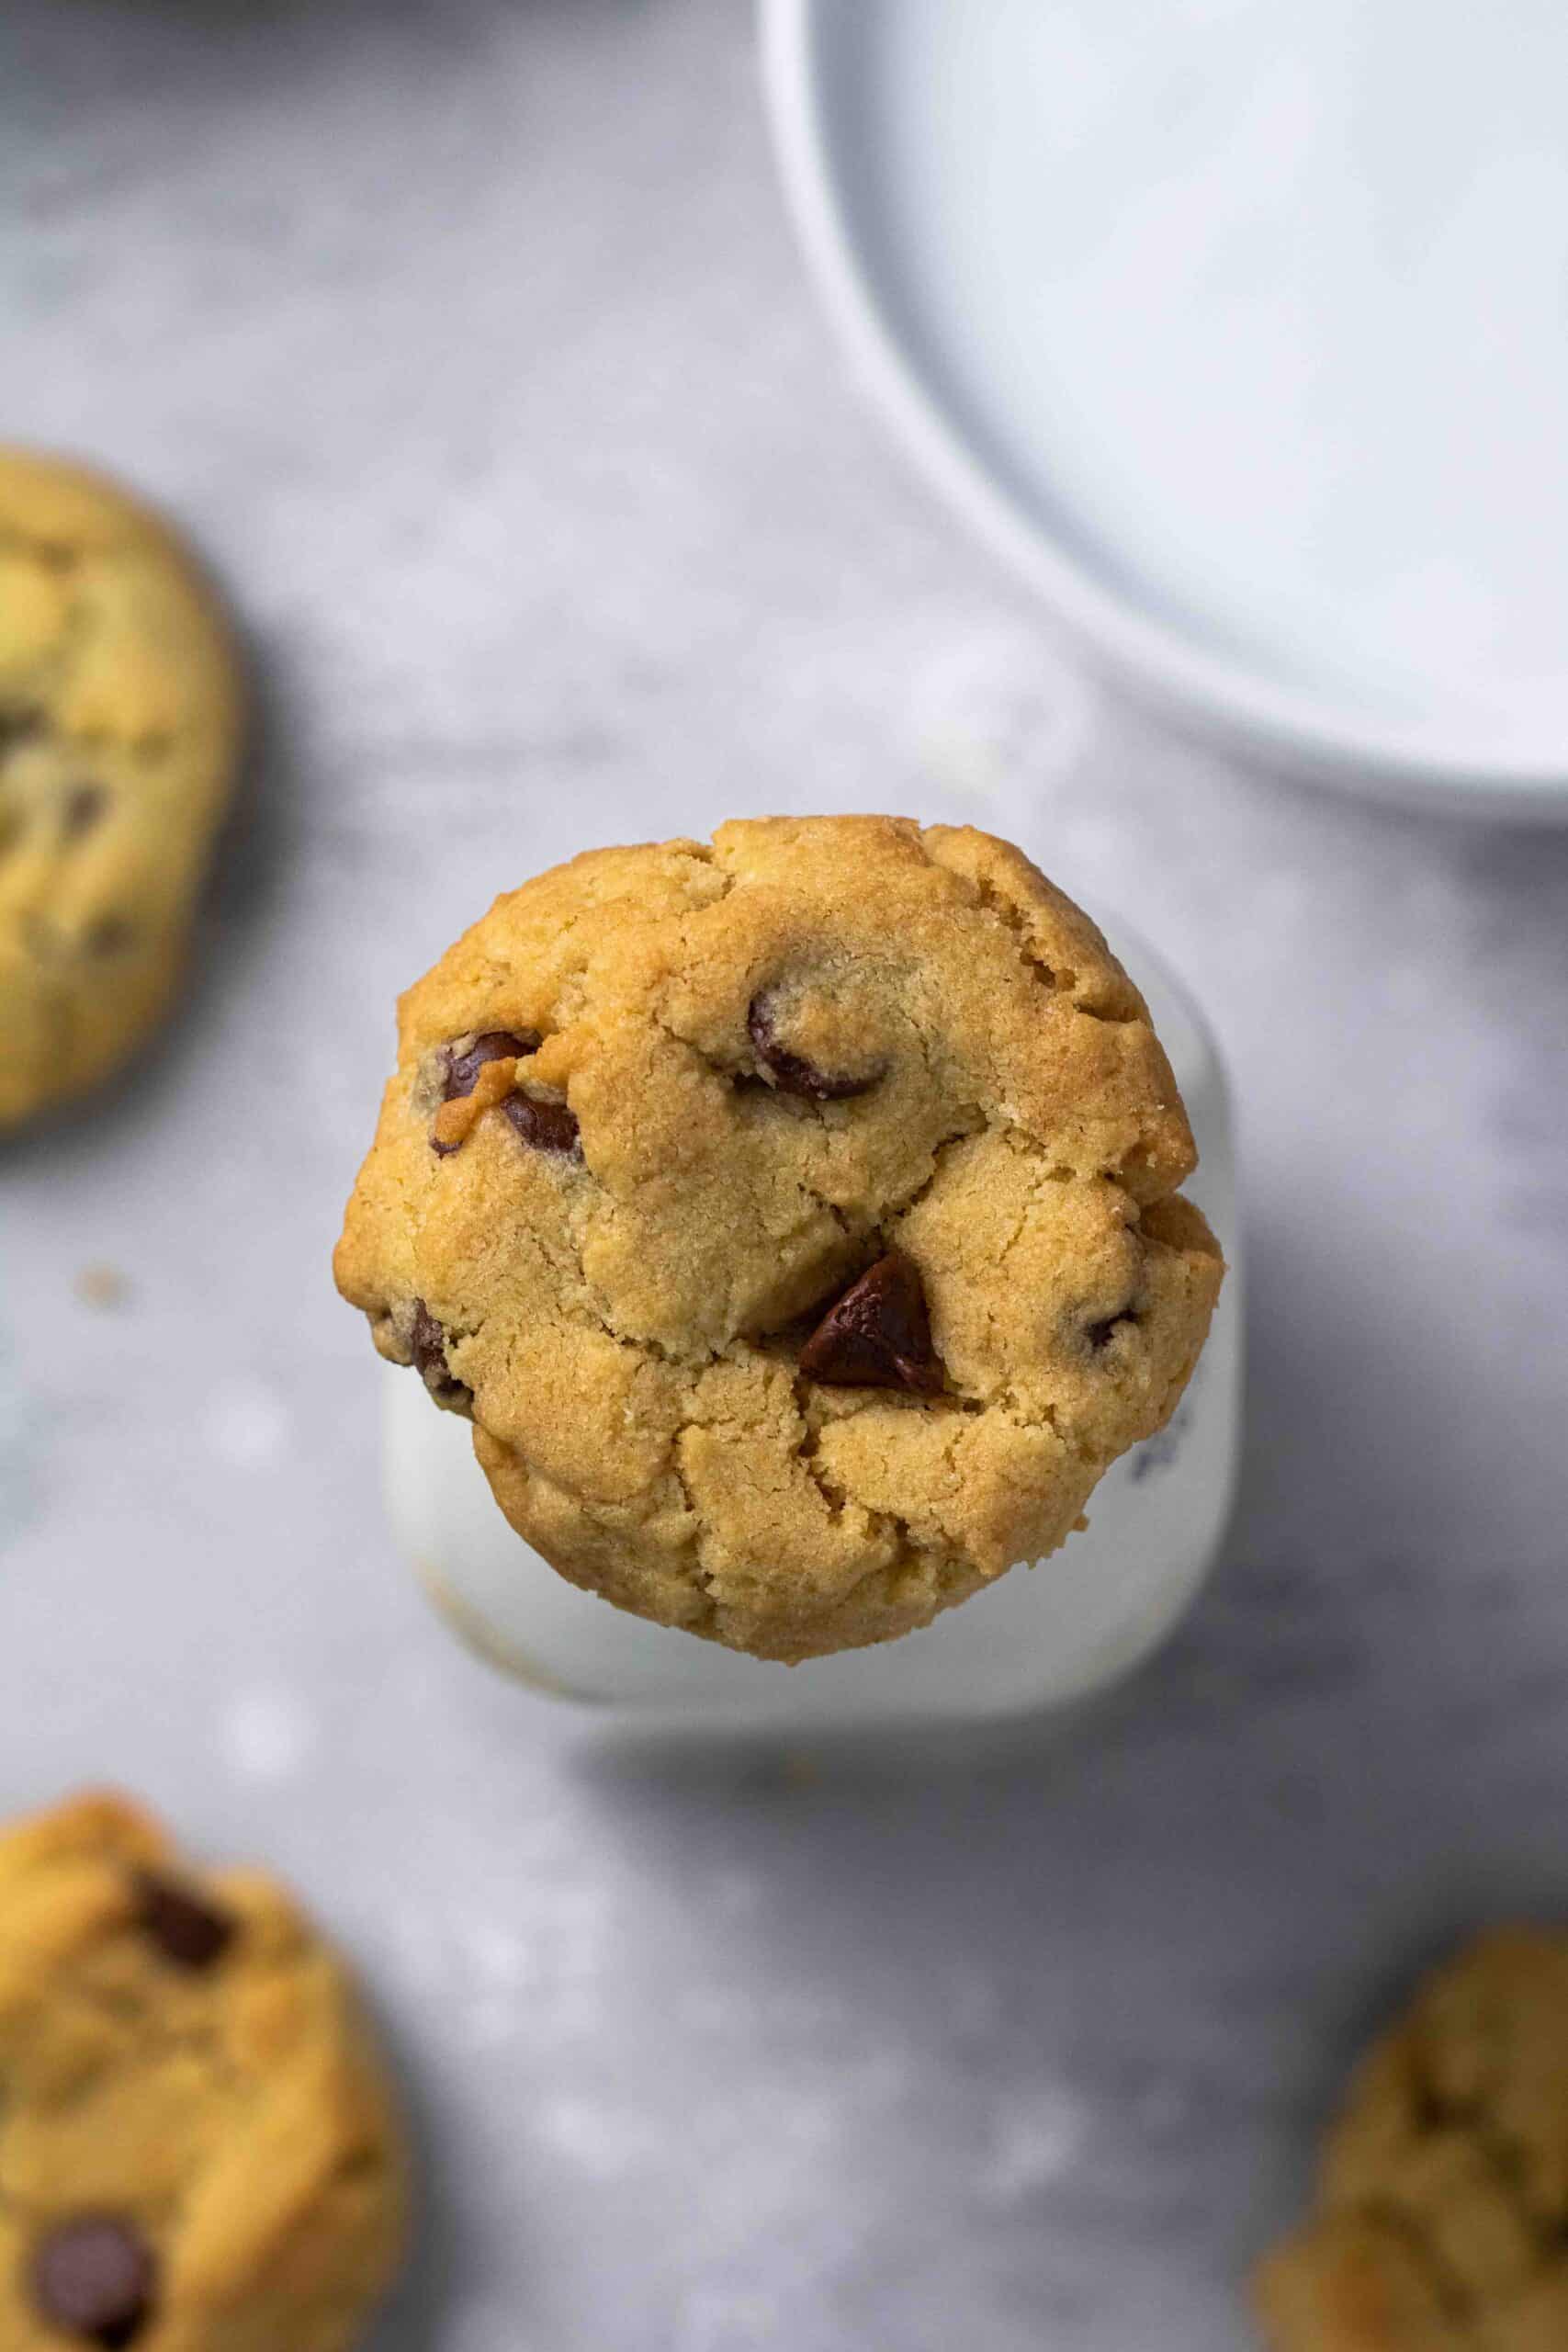 https://lifestyleofafoodie.com/wp-content/uploads/2021/02/Air-fryer-chocolate-chip-cookies-20-of-22-scaled.jpg